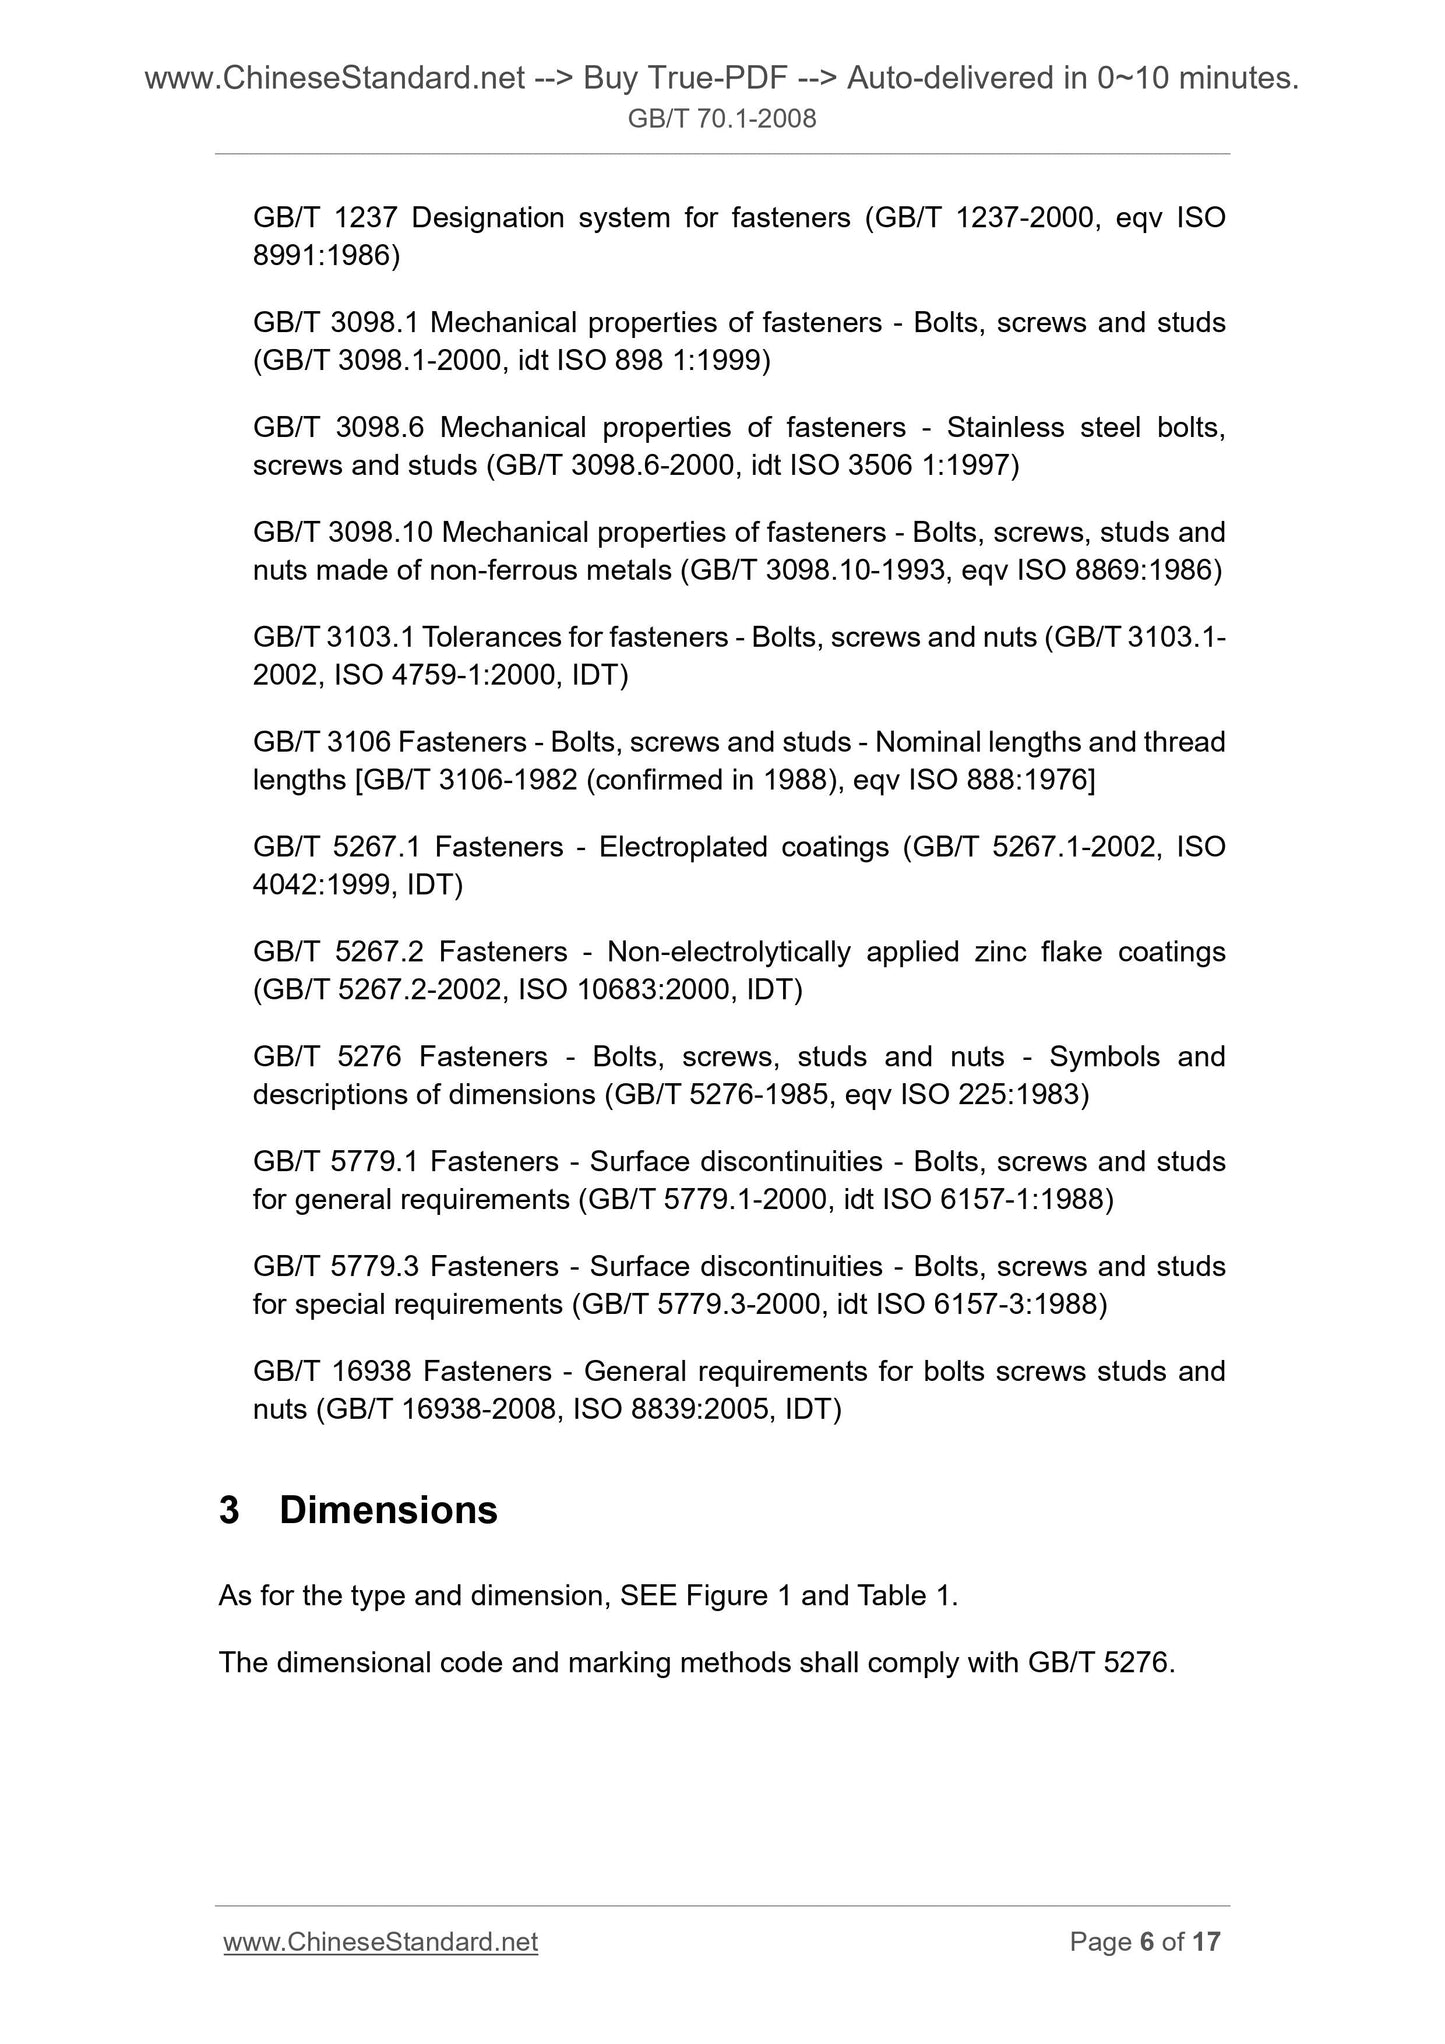 GB/T 70.1-2008 Page 5